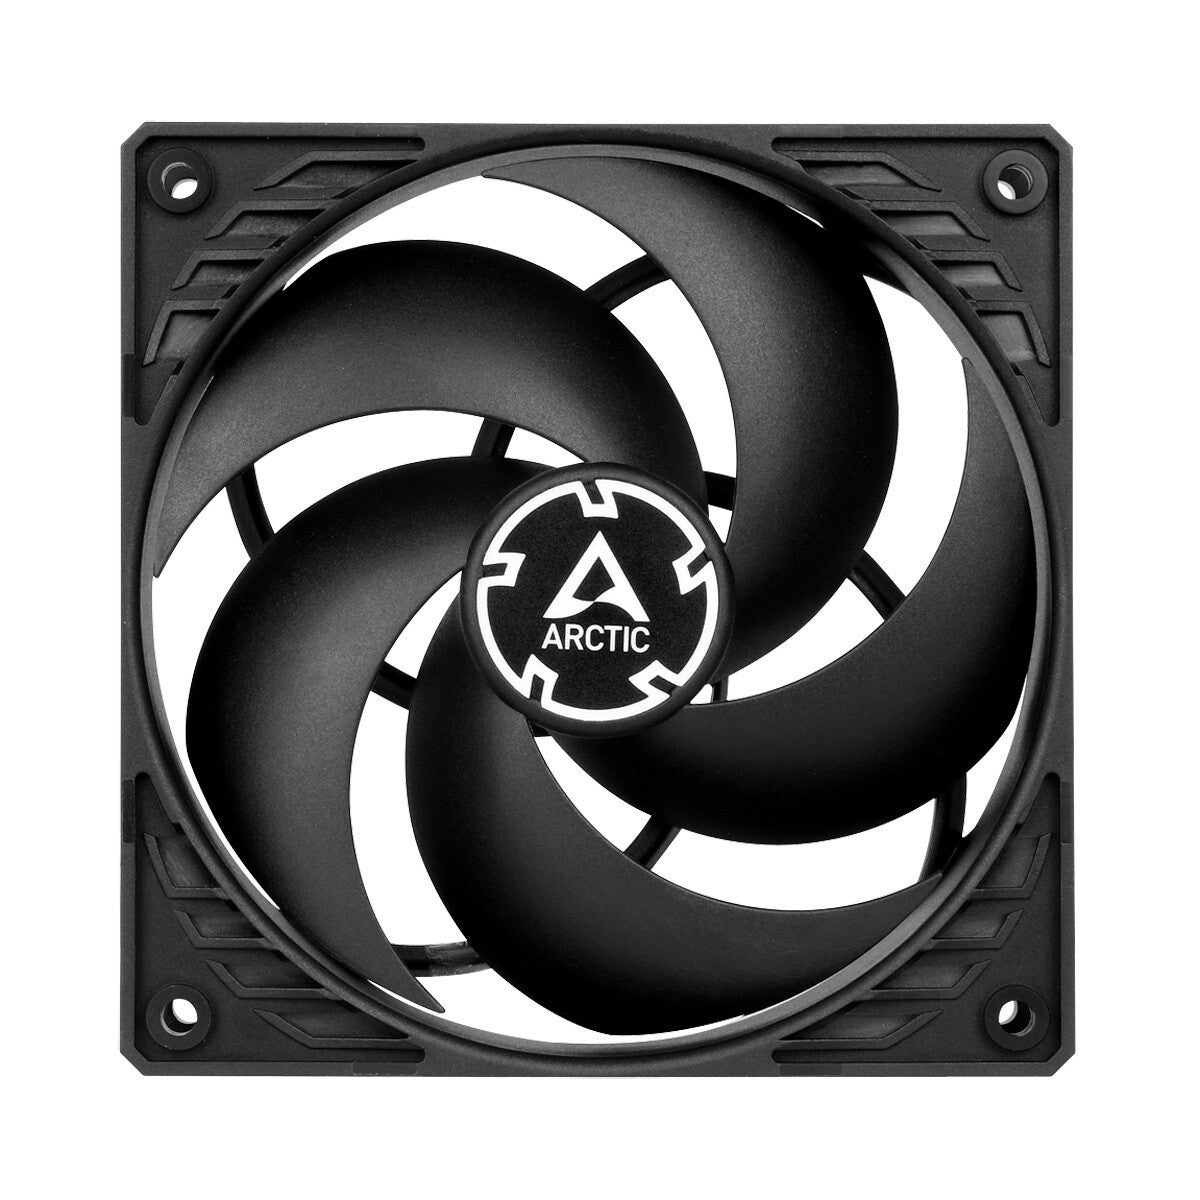 ARCTIC P12 - Computer Case Fan in Black - 120mm (Pack of 5)